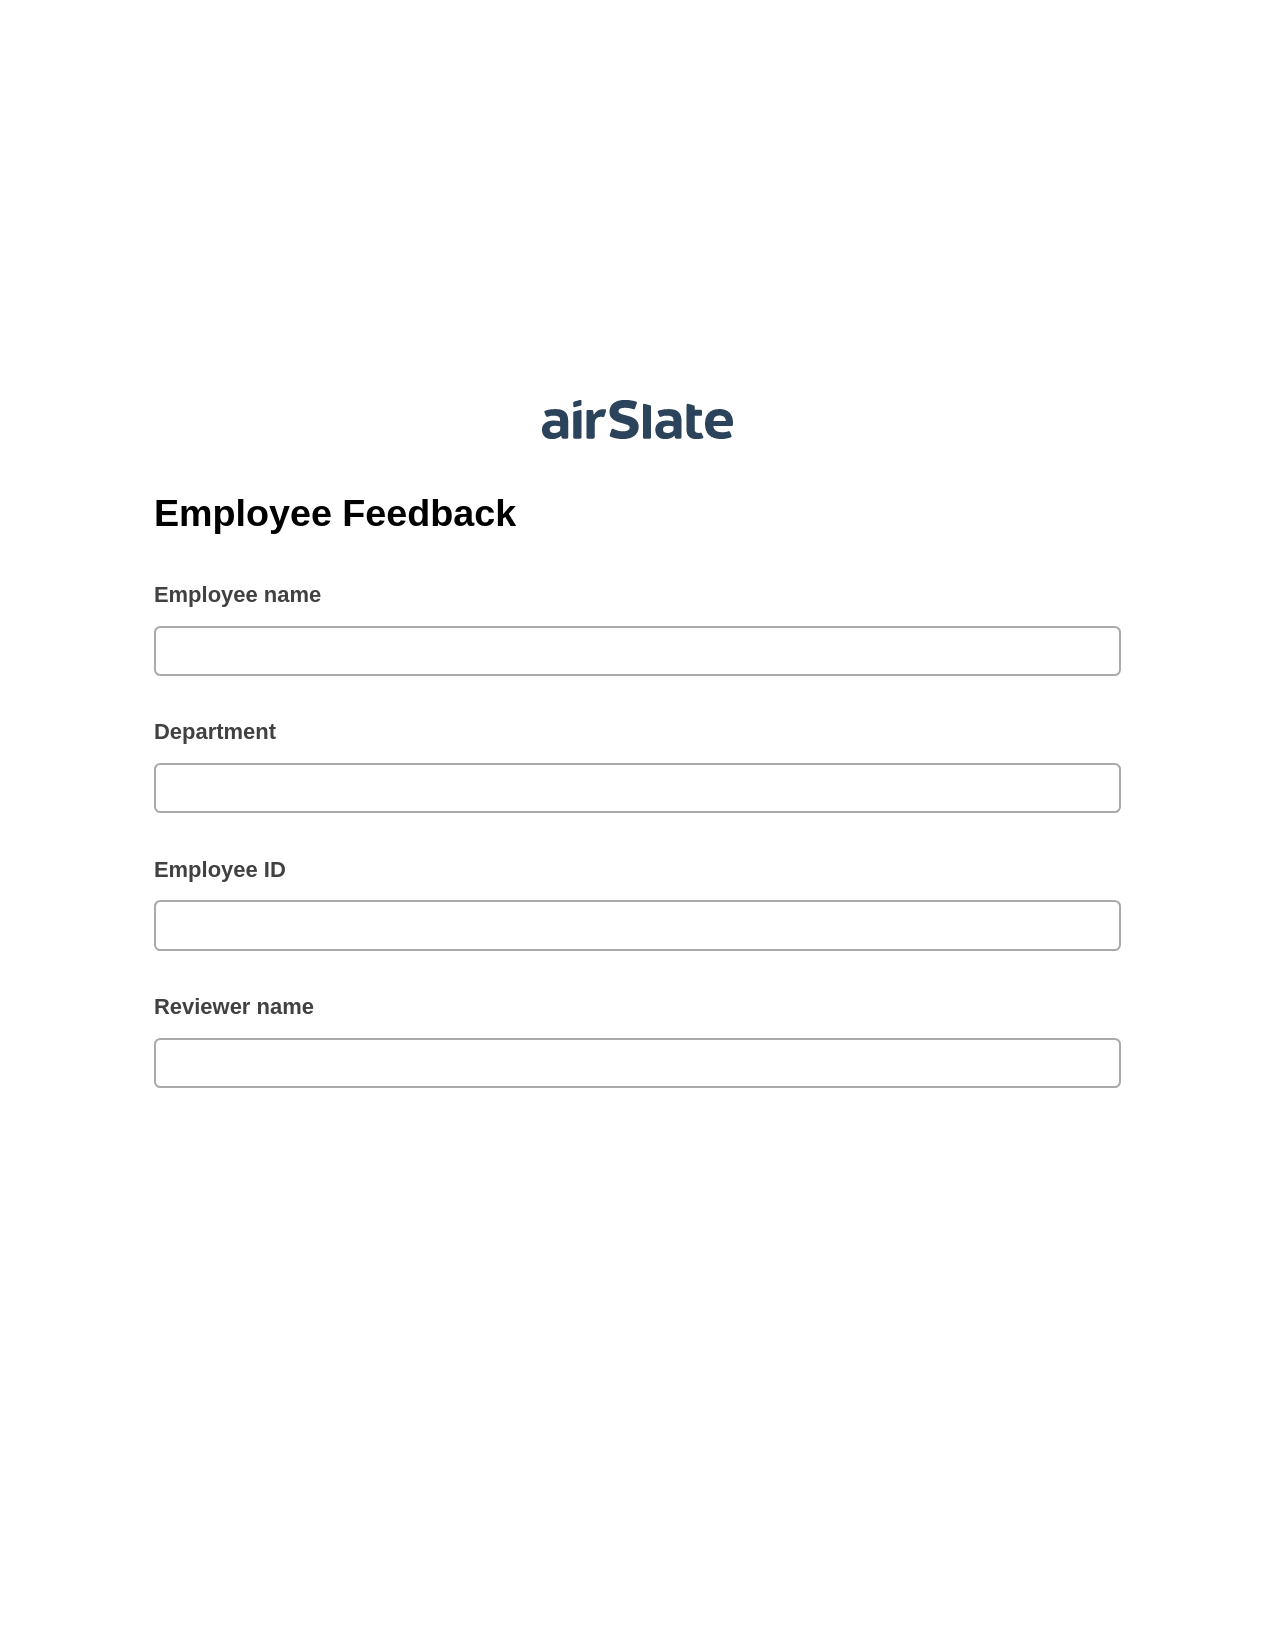 Employee Feedback Pre-fill from CSV File Bot, Roles Reminder Bot, OneDrive Bot